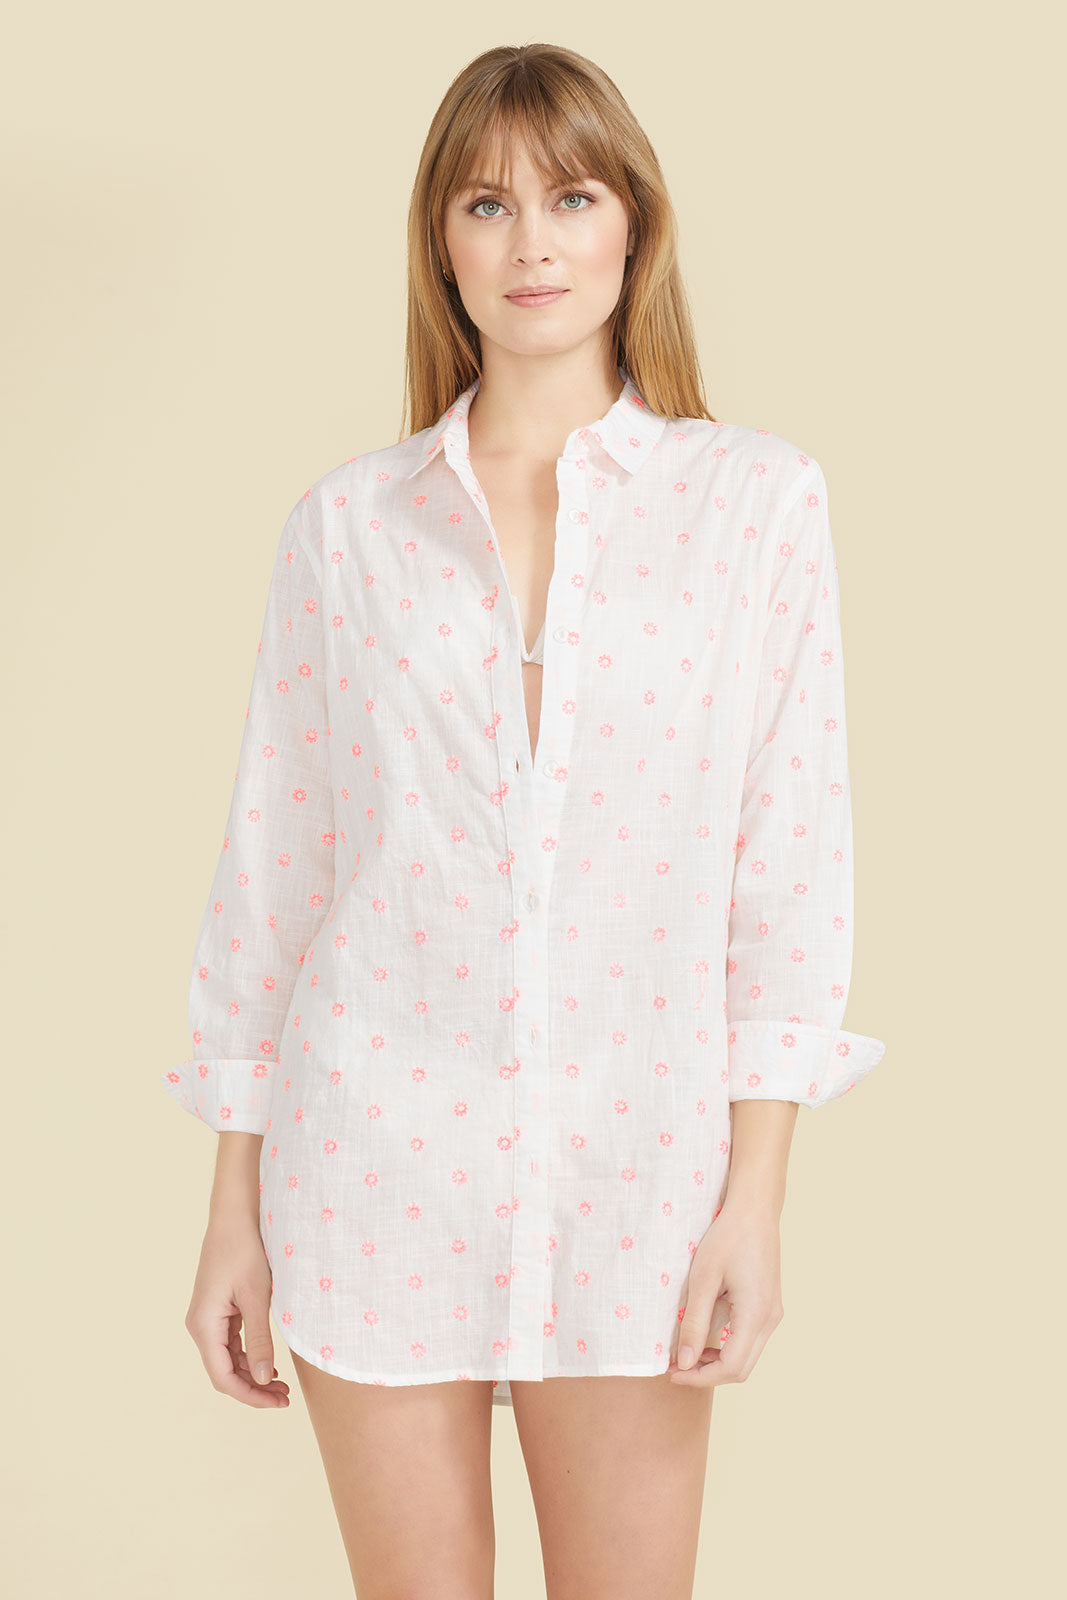 Primavera Shirt Dress - White with Pink Flowers by Sitano